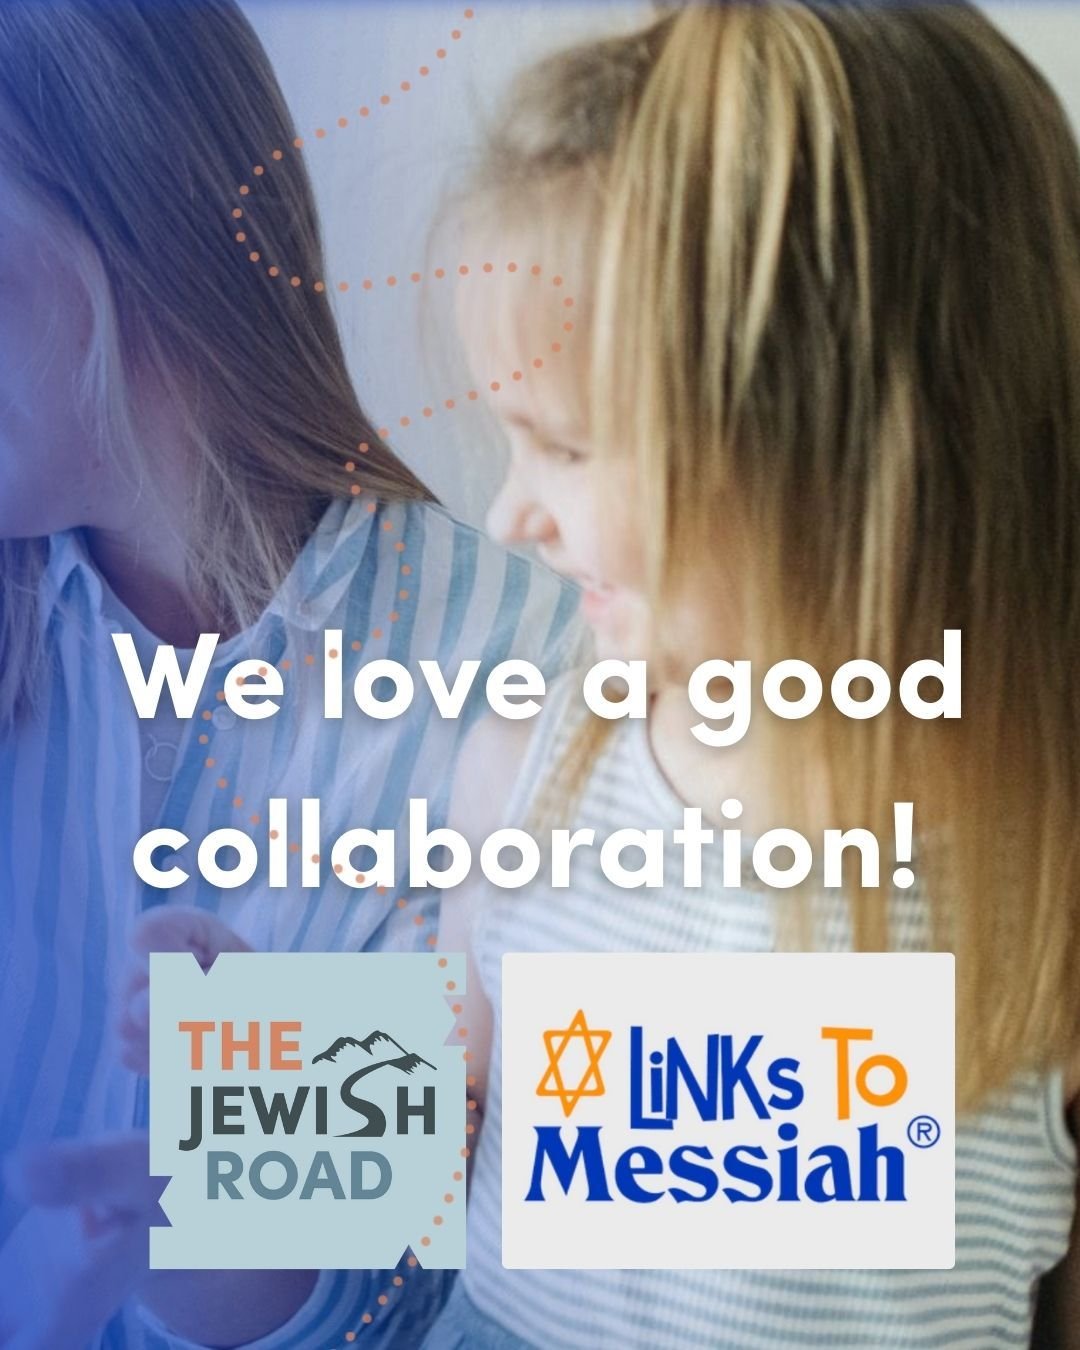 We love a good collaboration, and we are so happy to have had the privilege to come alongside our friend, Rachel Kushner, at Links to Messiah. As a Jewish believer and educator, Rachel has a heart for solid biblical teaching - and specifically gettin